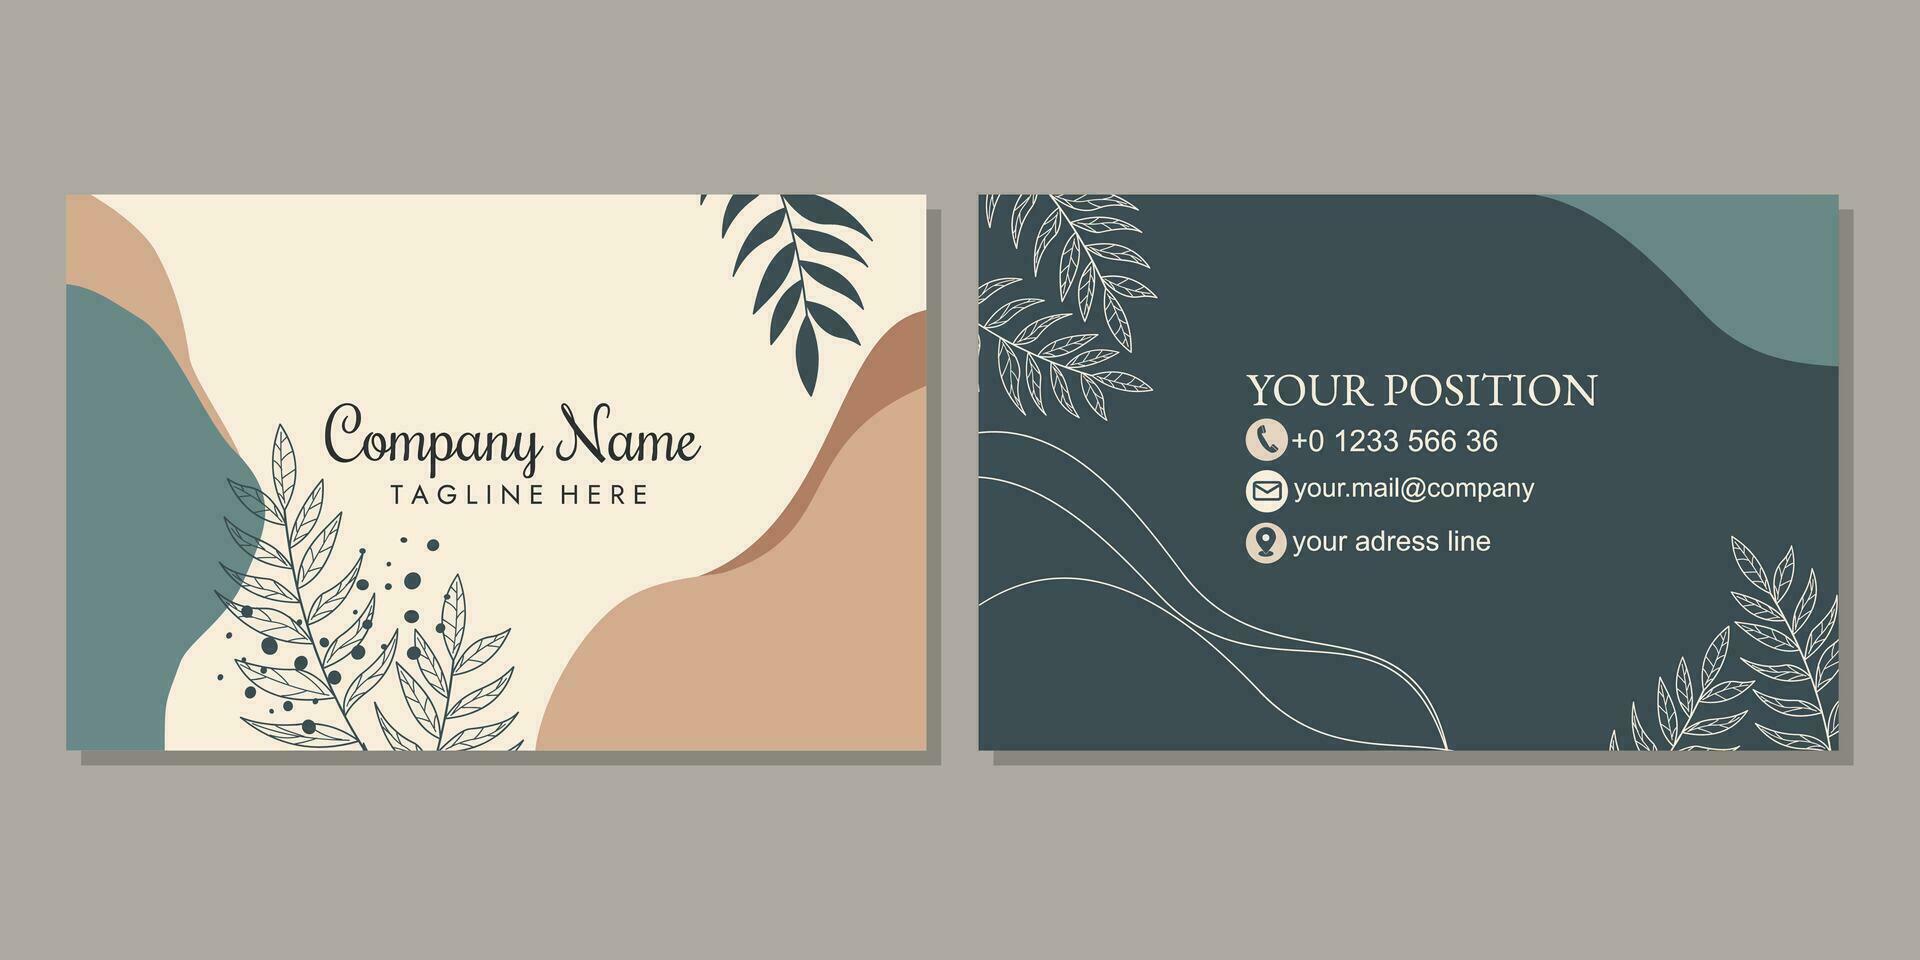 Elegant and beautiful business card template with hand drawn floral pattern. landscape orientation for identity cards, thank you cards, covers, invitations. vector